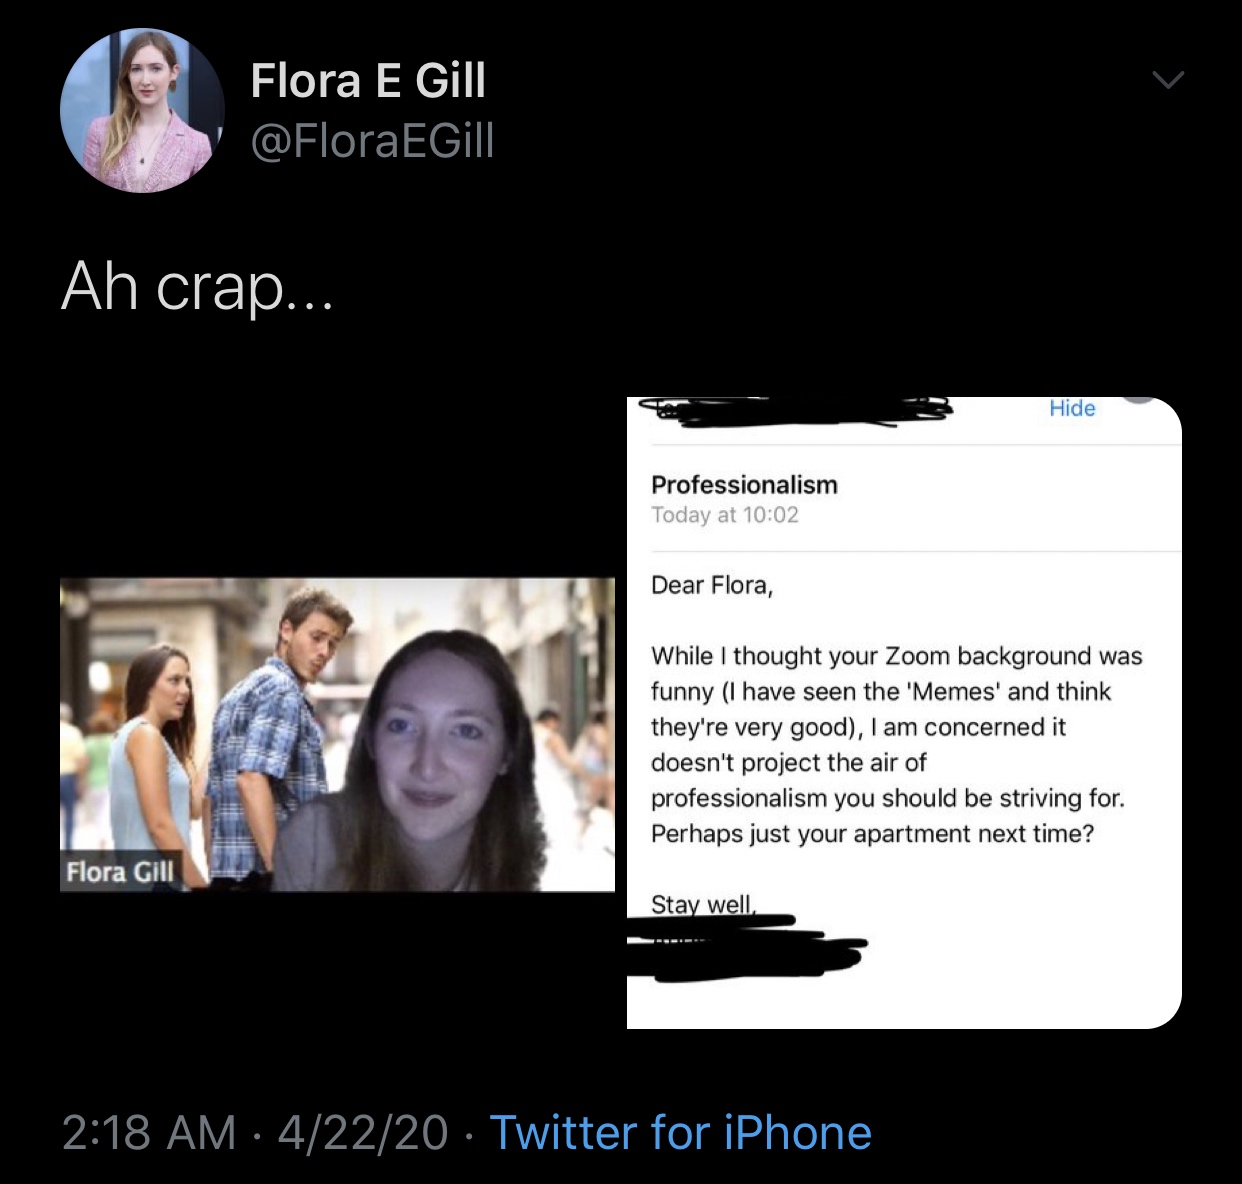 flora e gill meme - Flora E Gill Gill Ah crap... Hide Professionalism Today at Dear Flora, While I thought your Zoom background was funny I have seen the 'Memes' and think they're very good, I am concerned it doesn't project the air of professionalism you